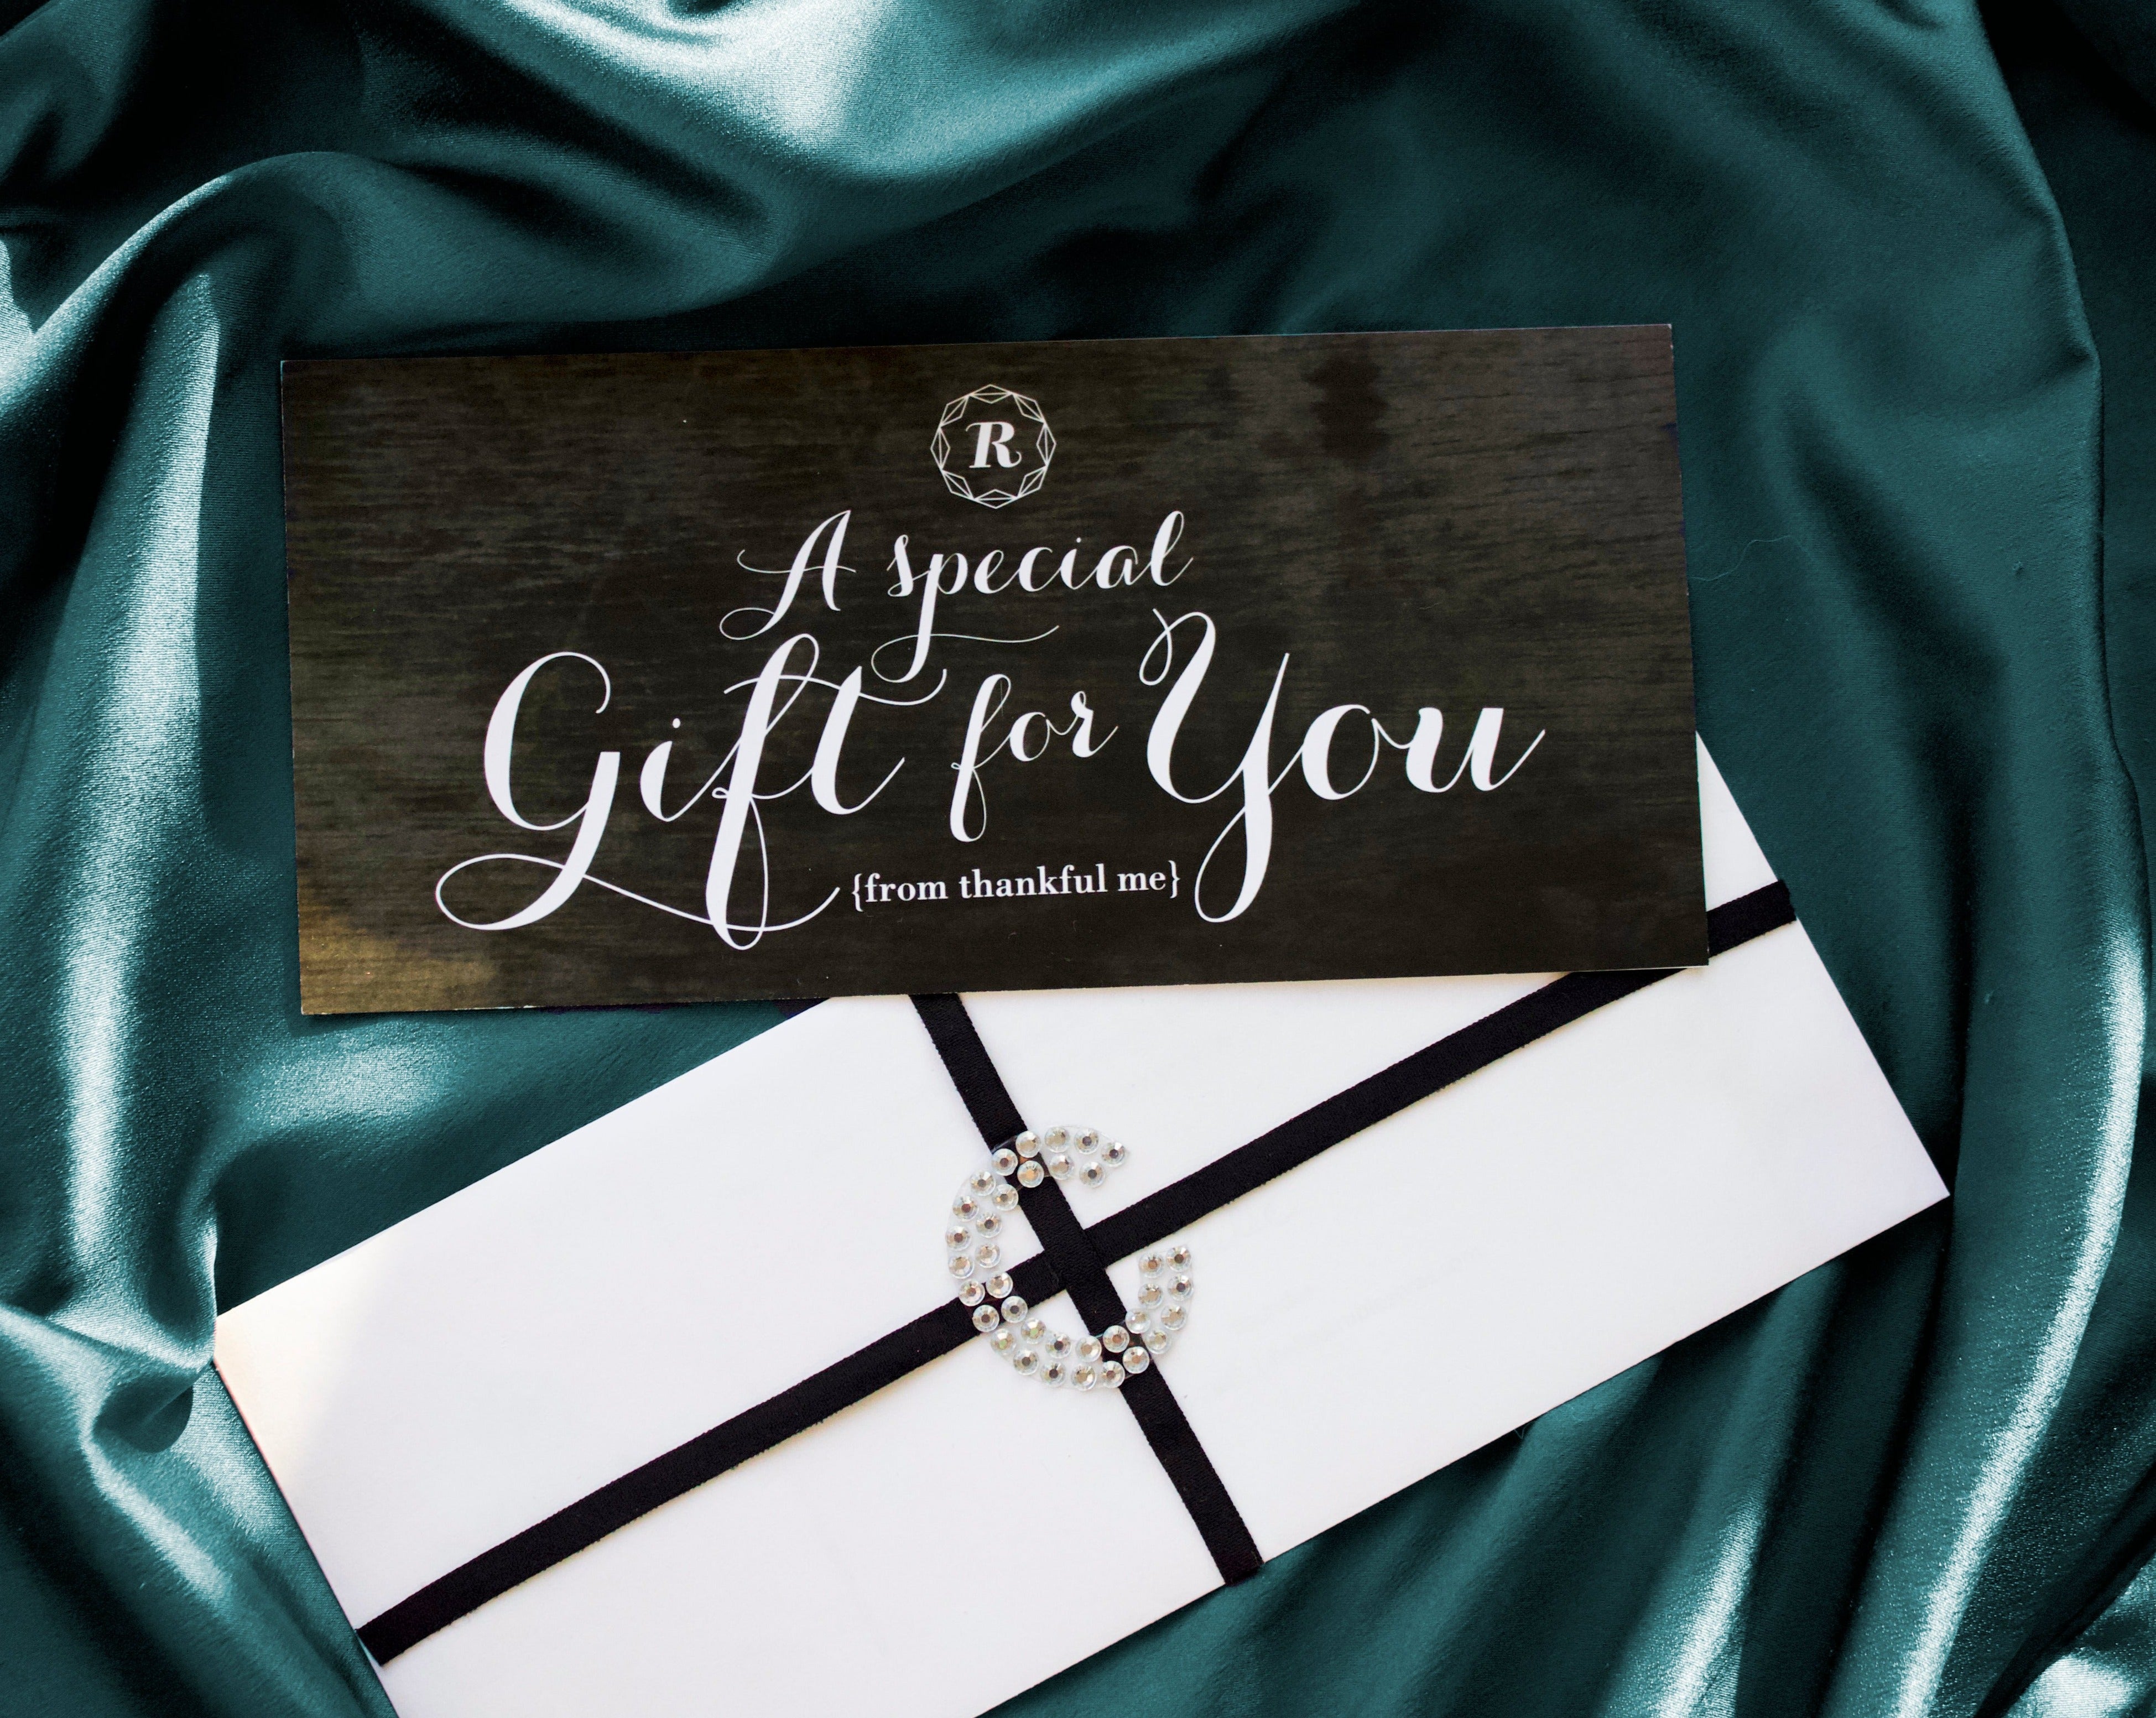 RUBIES CUSTOM BRAS: LUXURY WRAPPED AND PERSONALIZED GIFT CARDS FOR HER